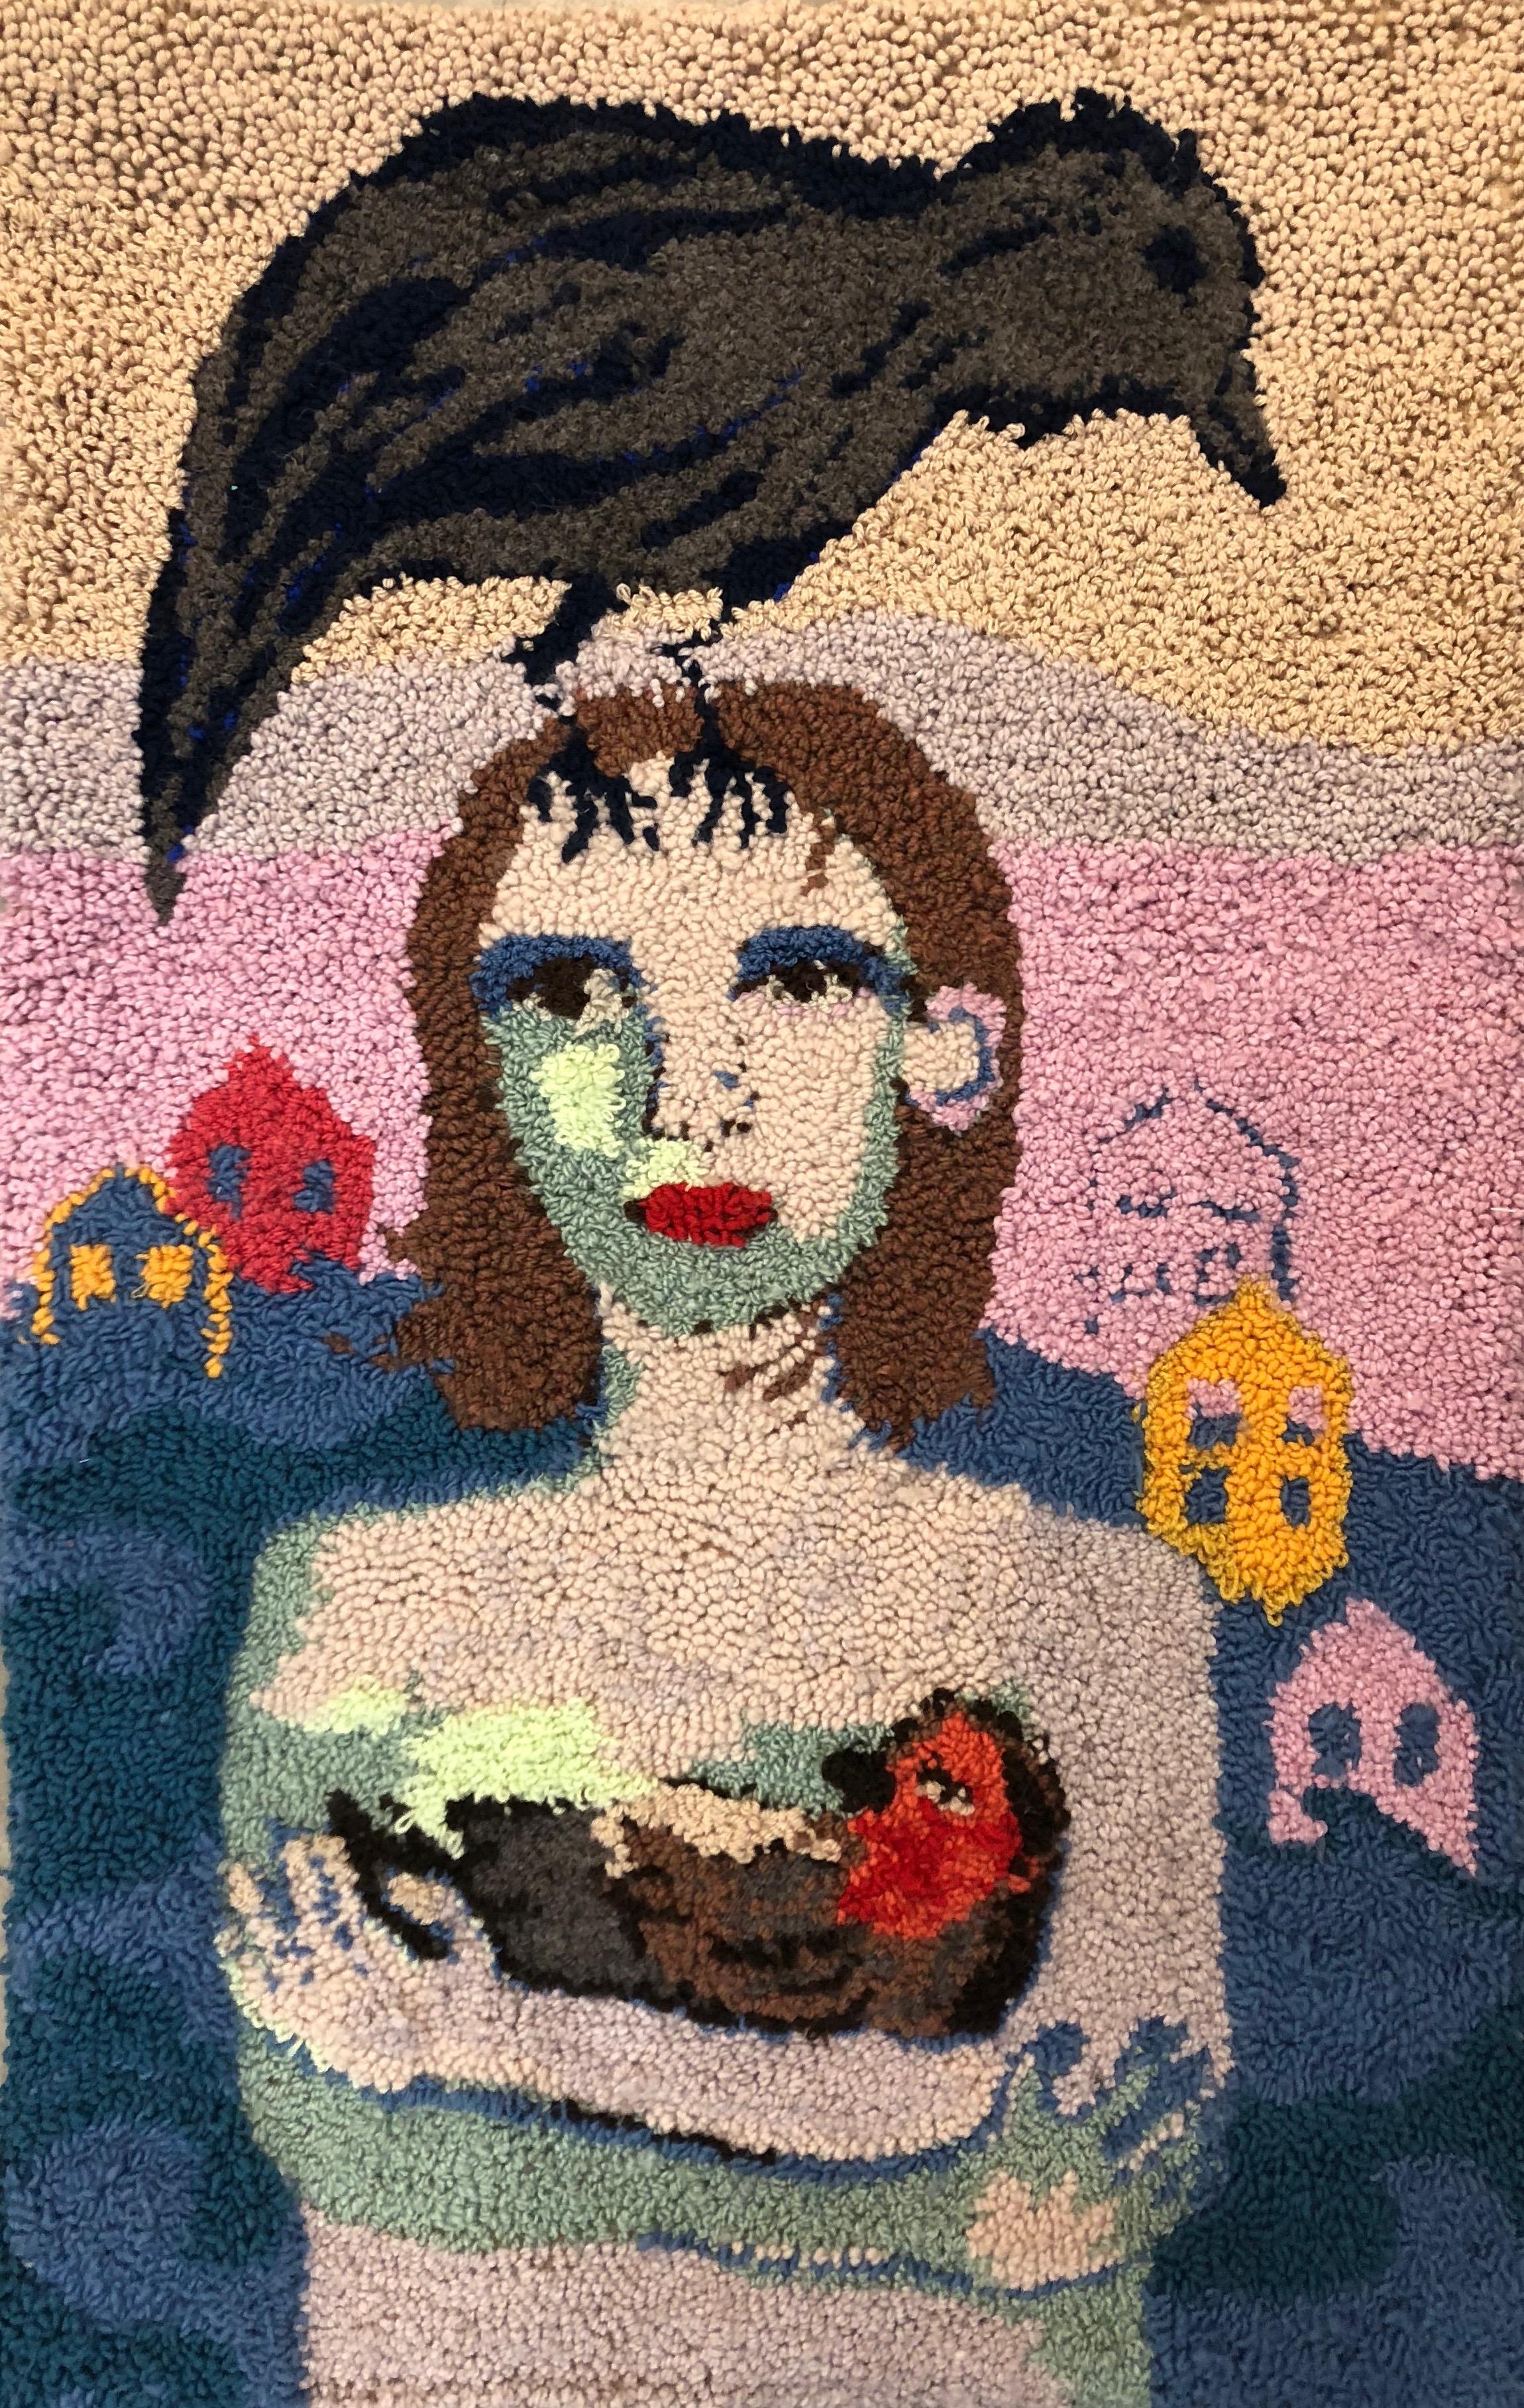 Textile art by Selby Hurst Inglefield of a woman with a crow on her head